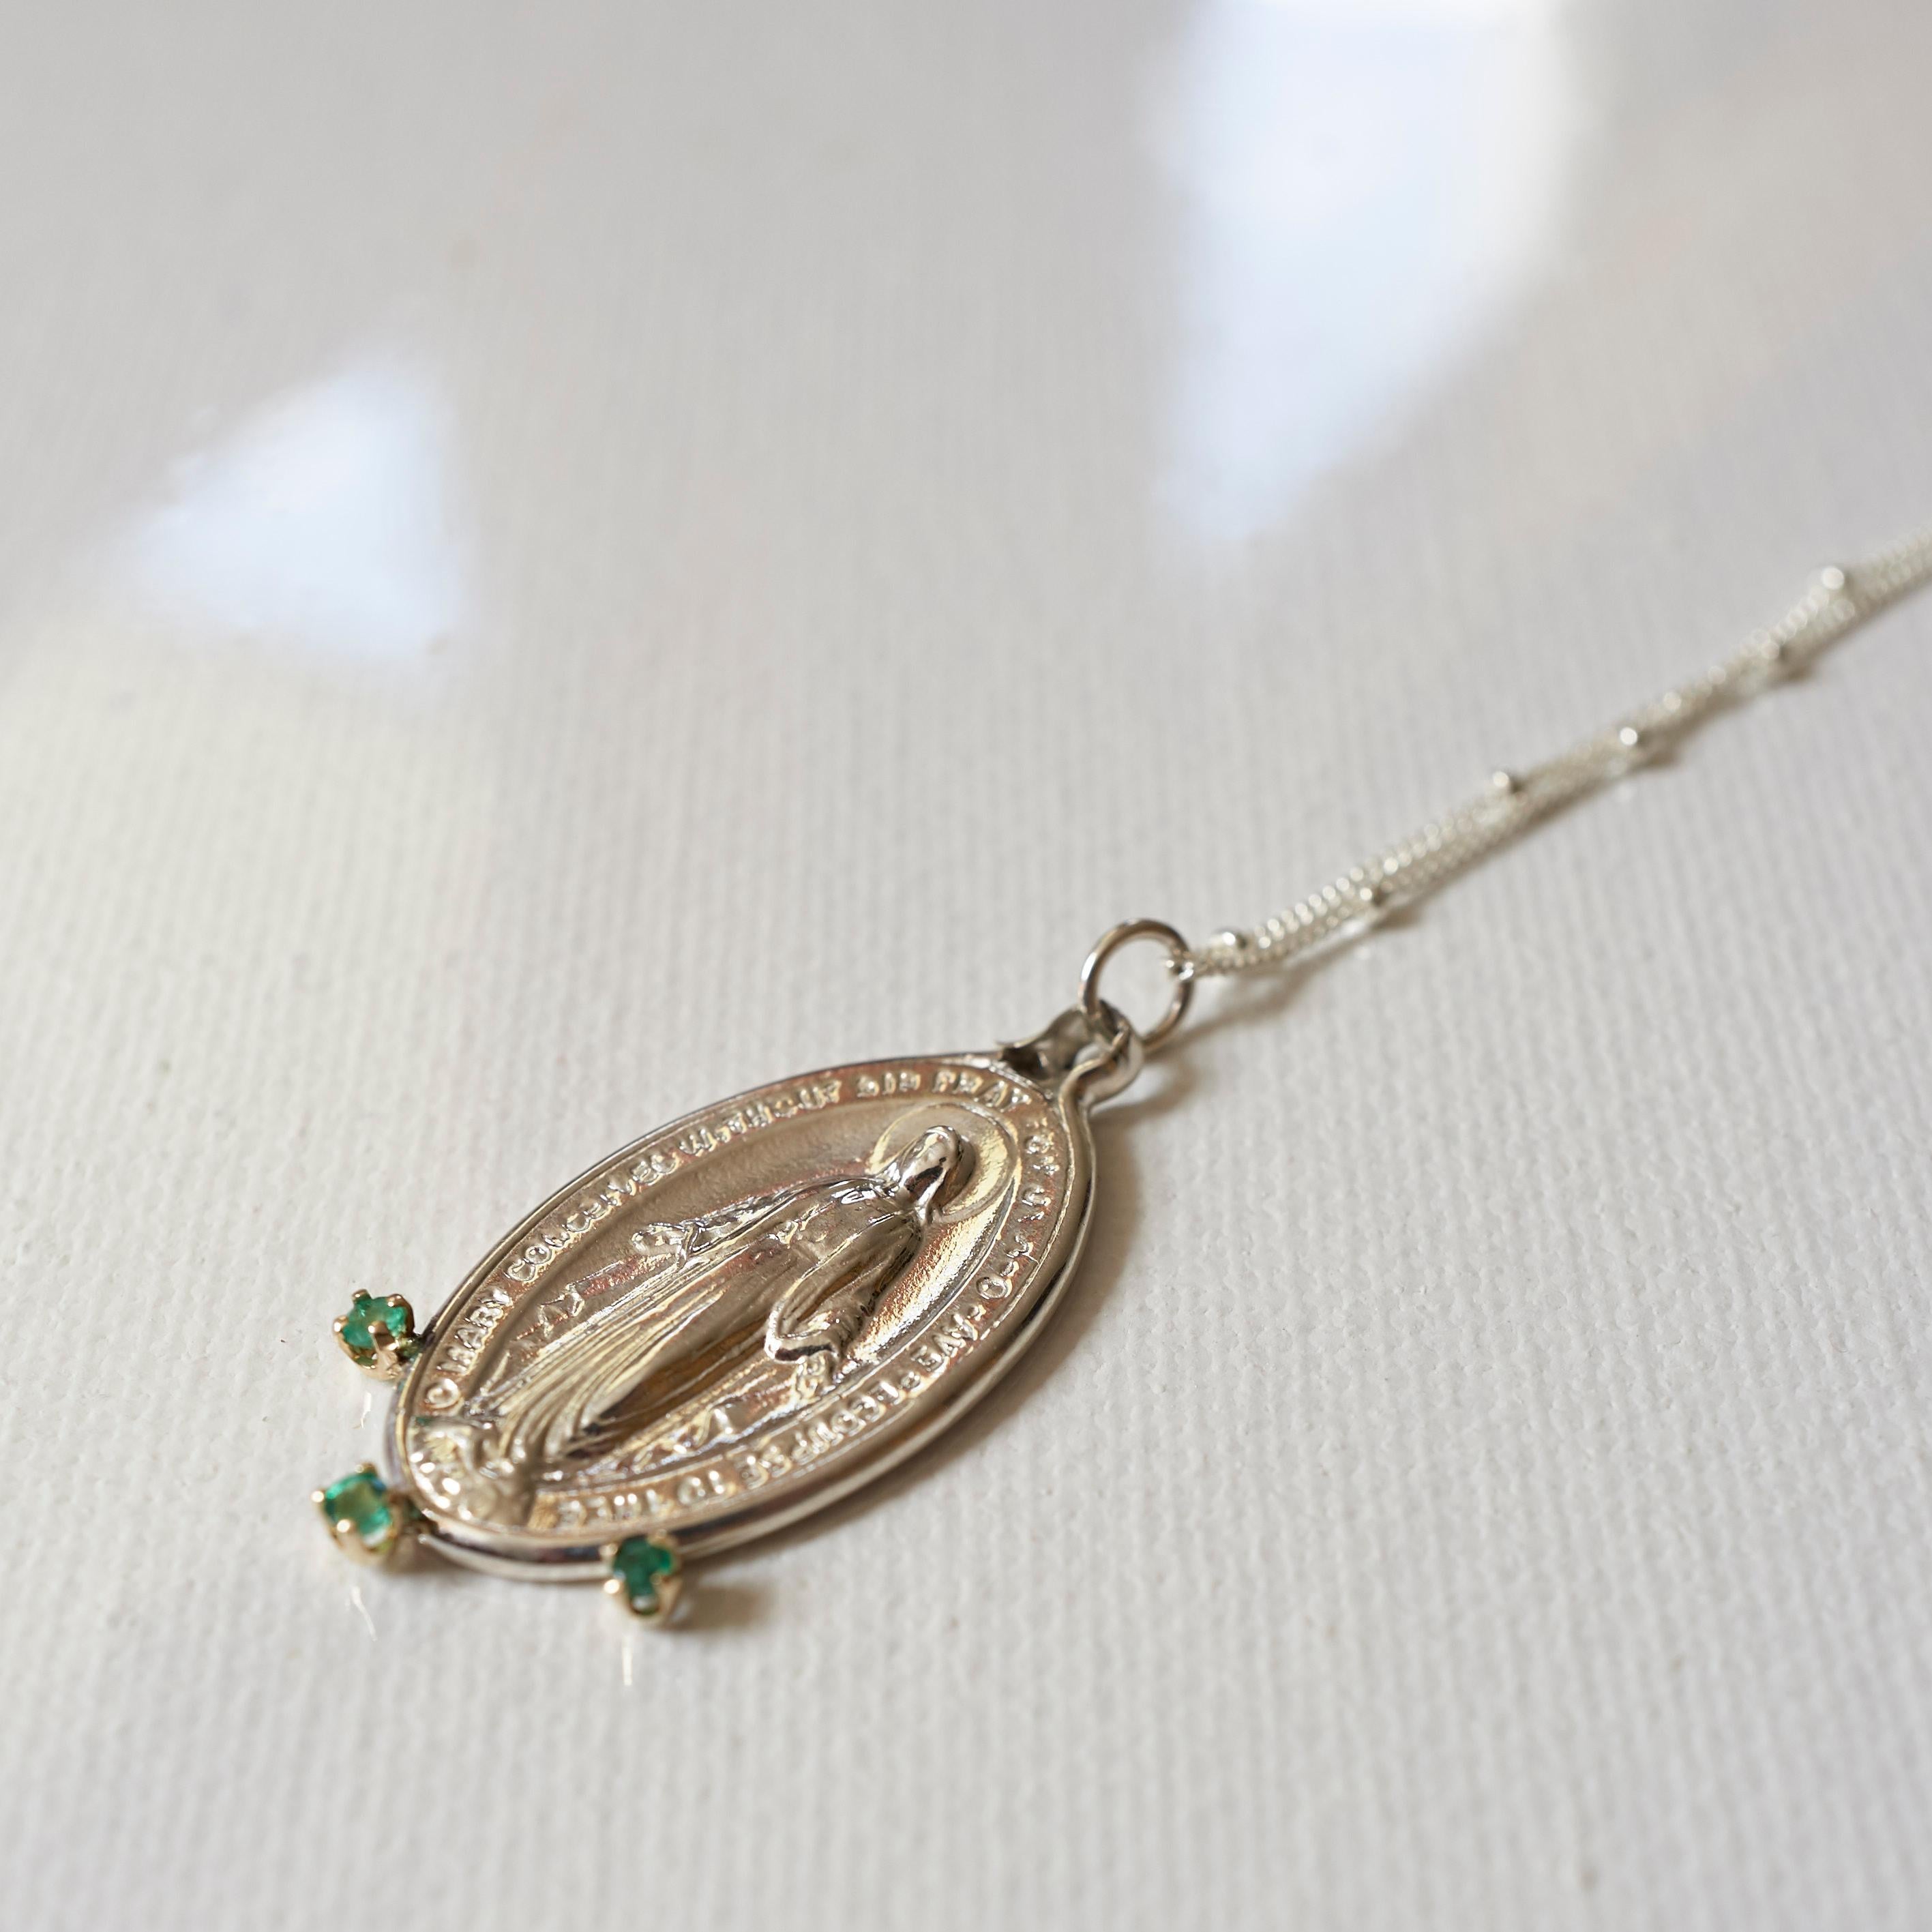 Contemporary Emerald Silver Pendant Spiritual Necklace Virgin Mary Medal Oval J Dauphin For Sale